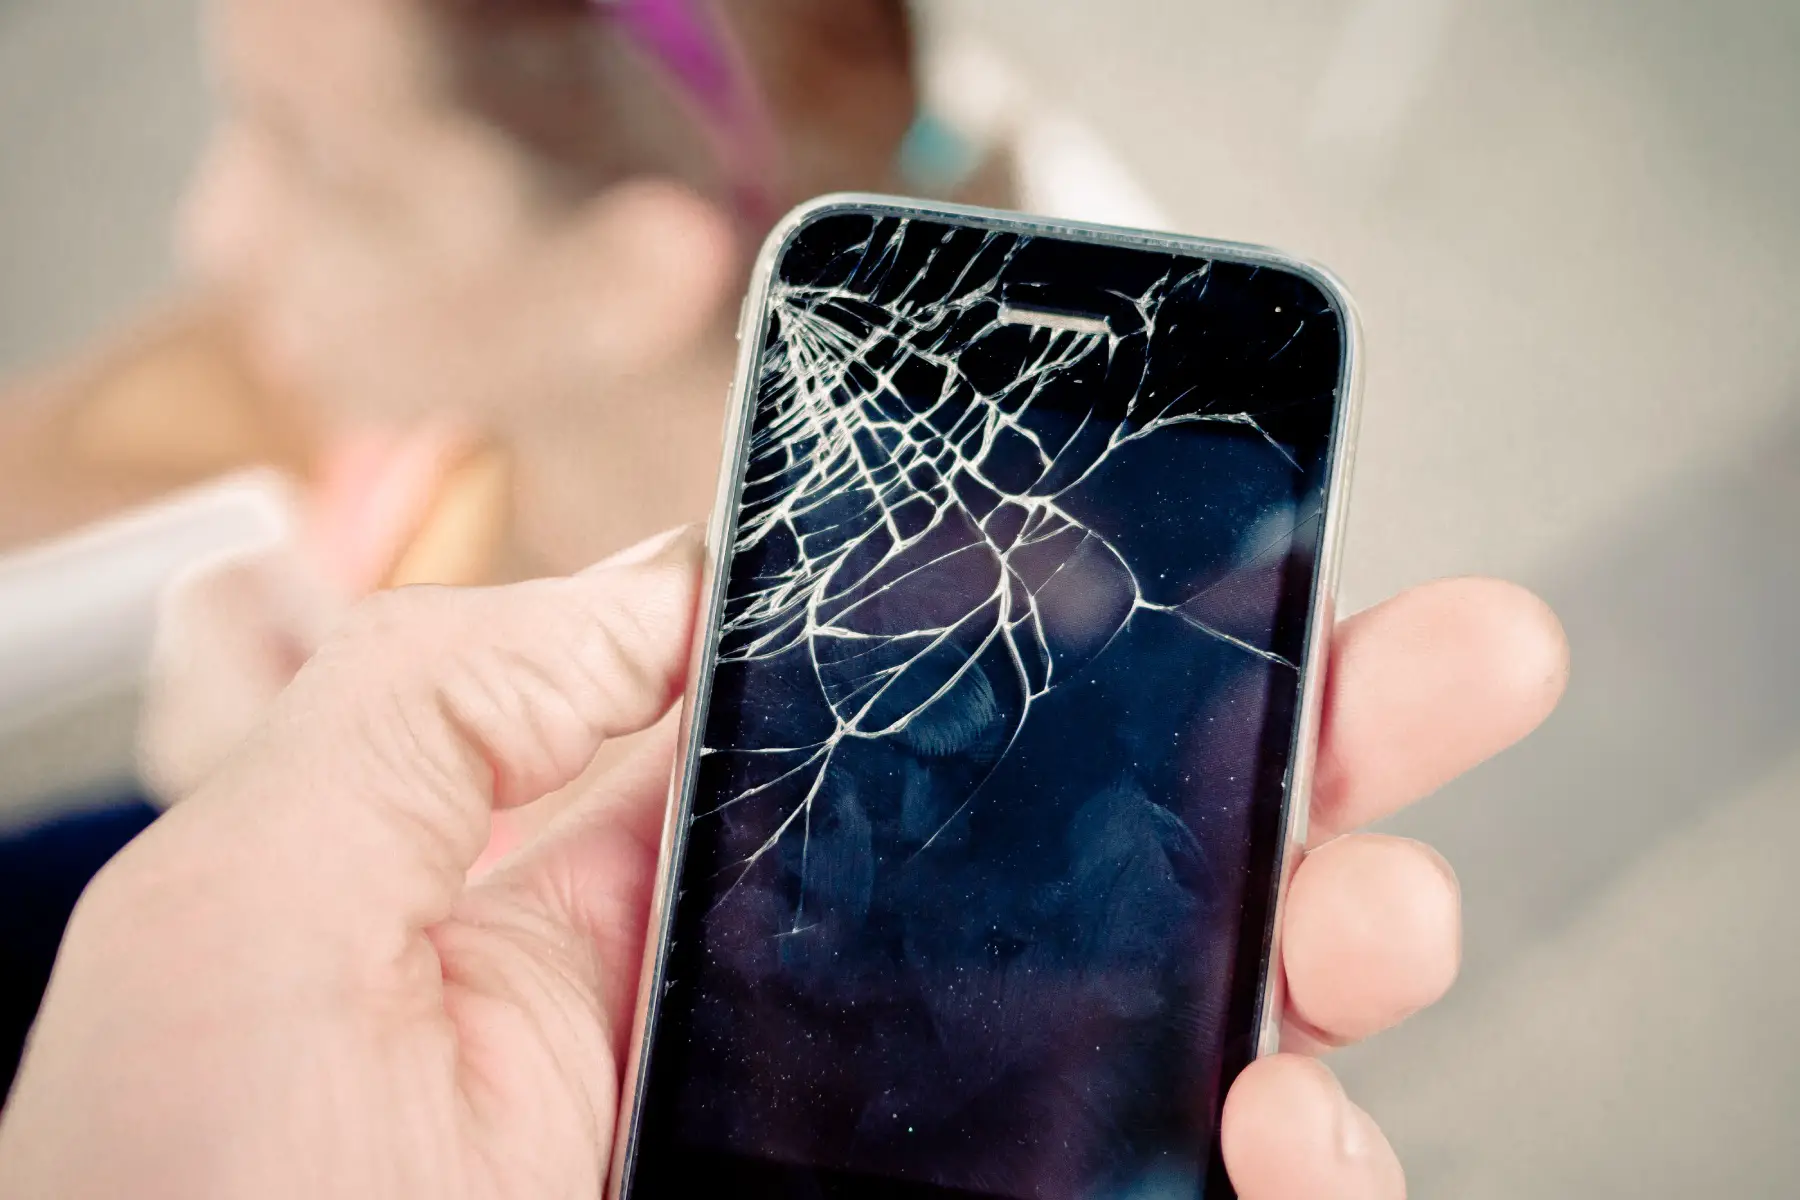 a close up of a hand holding a smartphone with a shattered screen